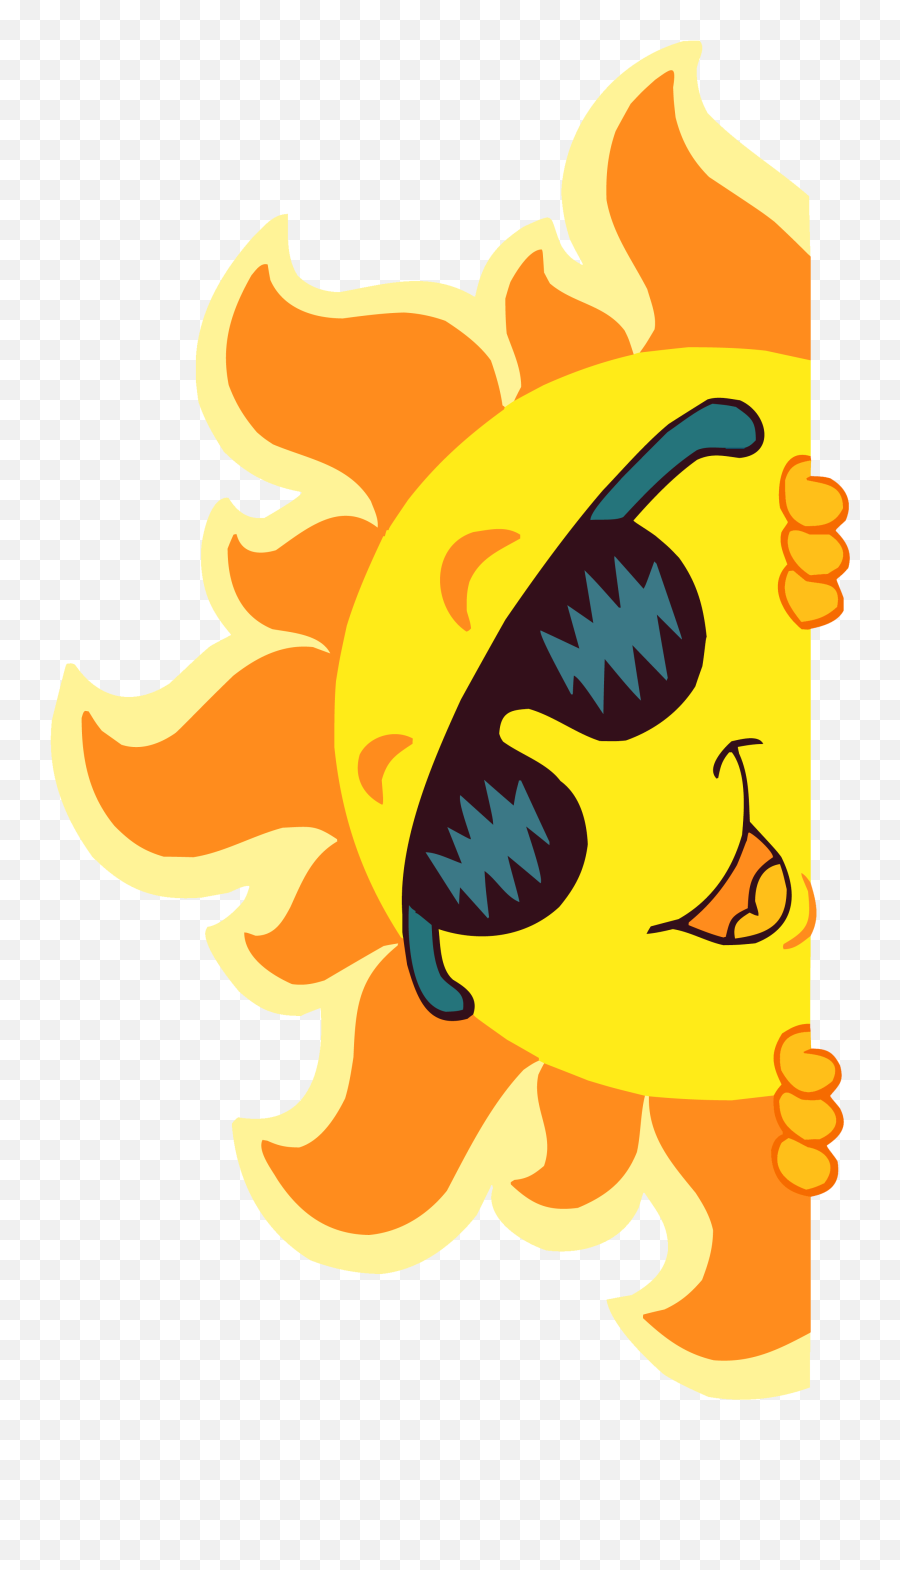 Library Of Smiling Sun Vector Transparent Download Royalty - Related To Summer Season Emoji,Sun Clipart